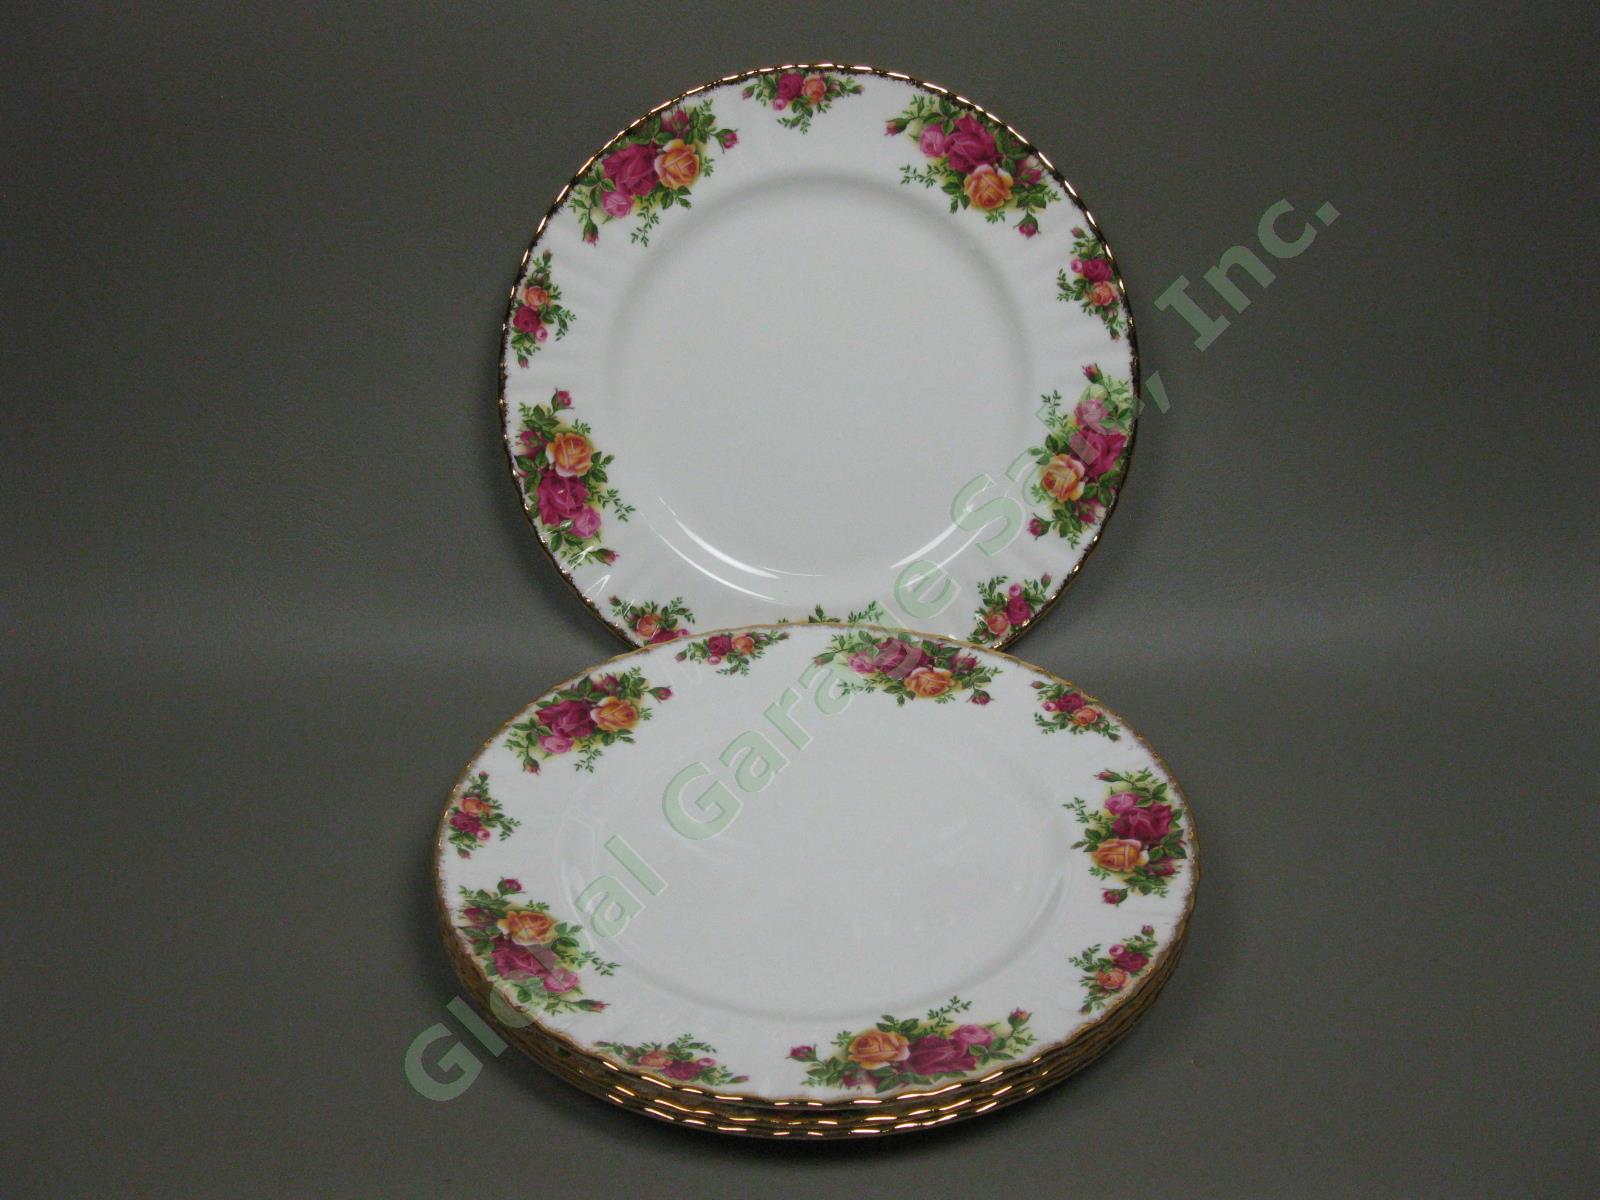 4 Royal Albert Old Country Roses Place Settings Serving Bowl Platter Plate Set 4